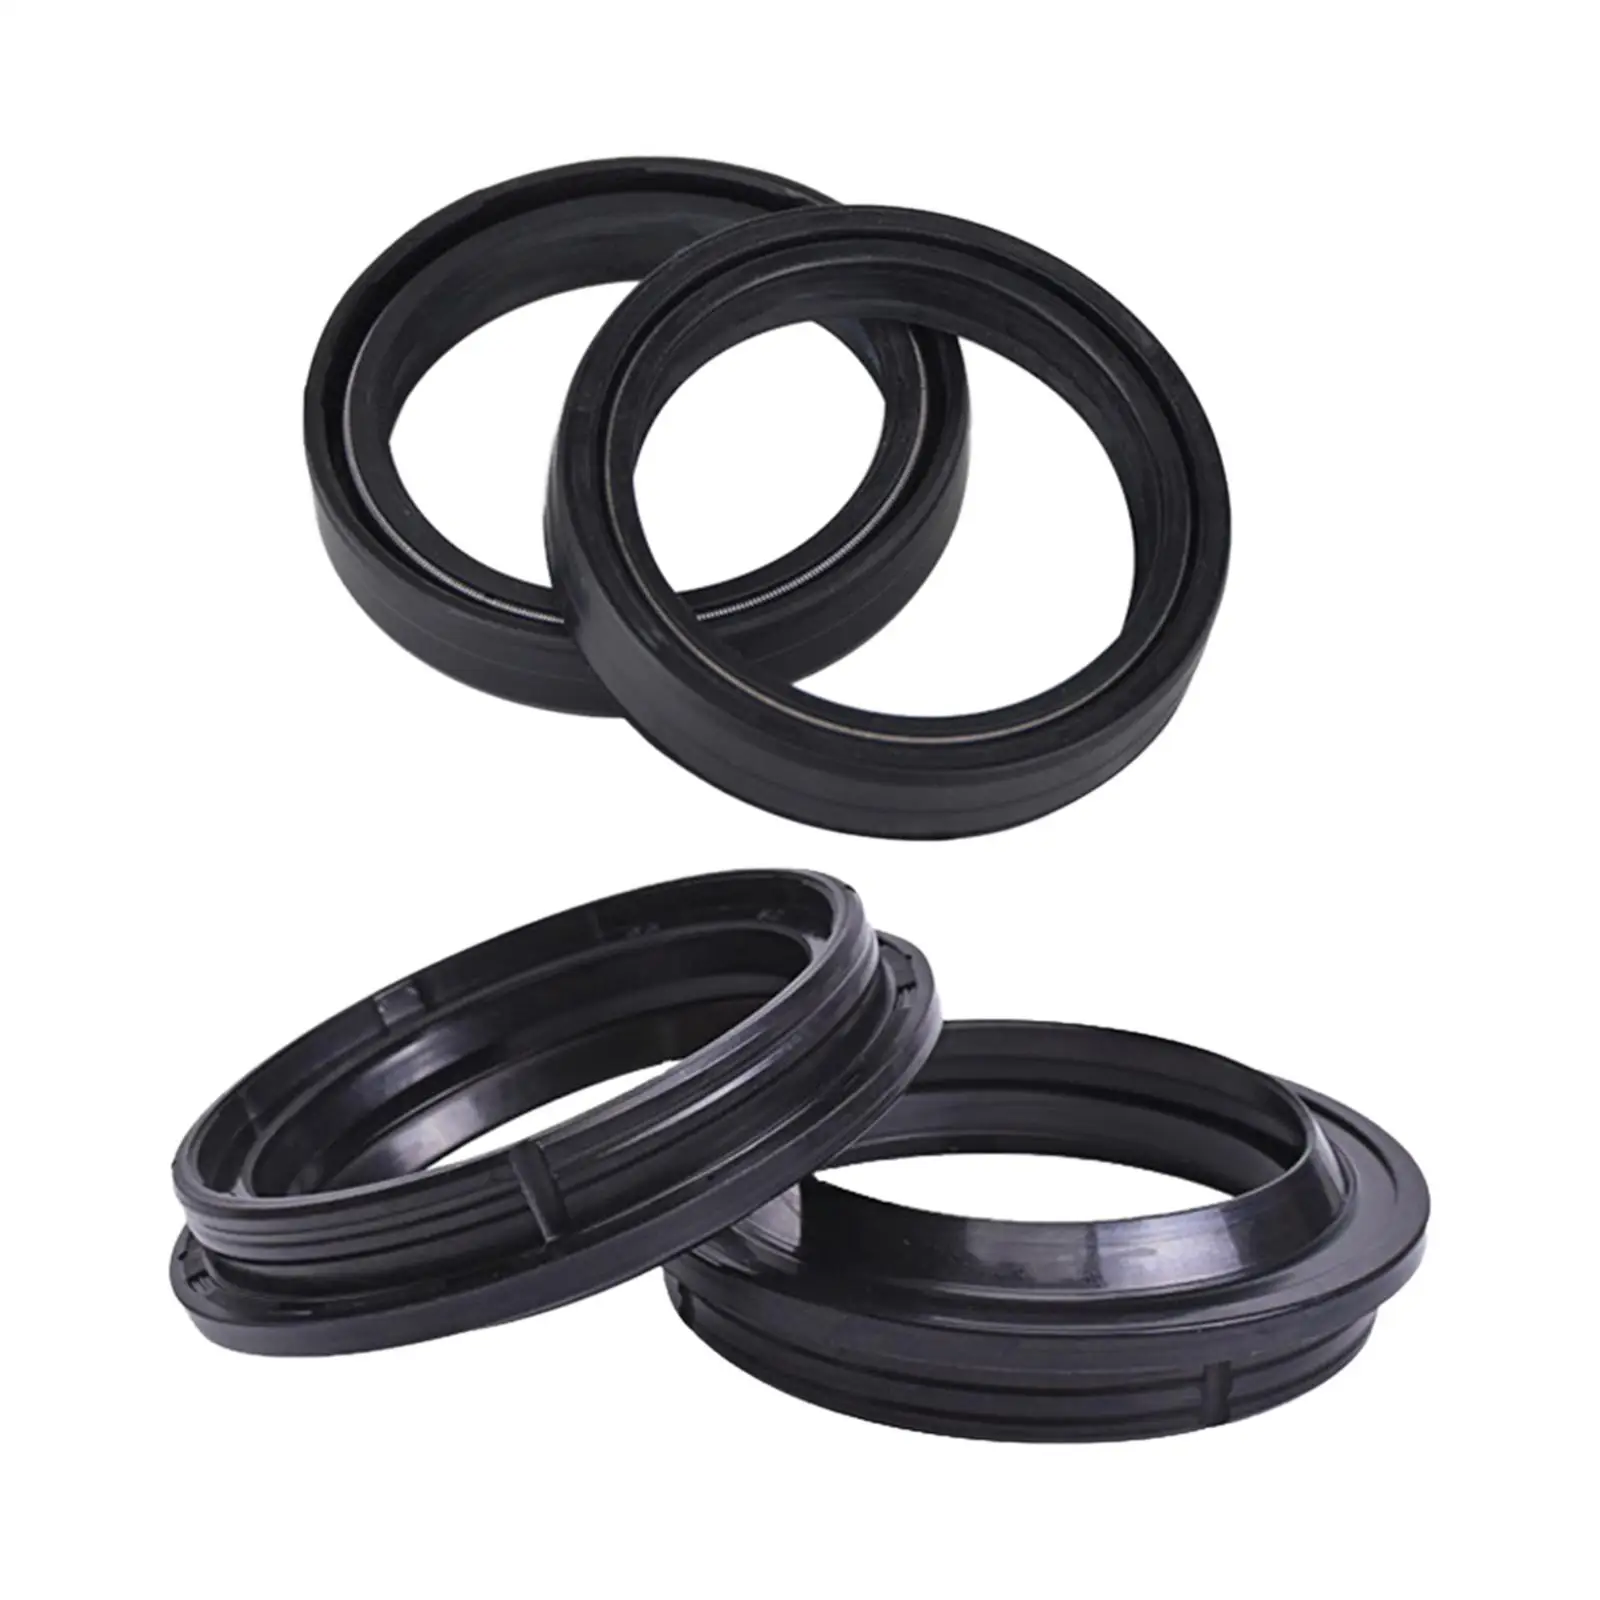 Motorcycle Front Fork Oil Seal and Dust Seal Kit for Ducati Hypermotard